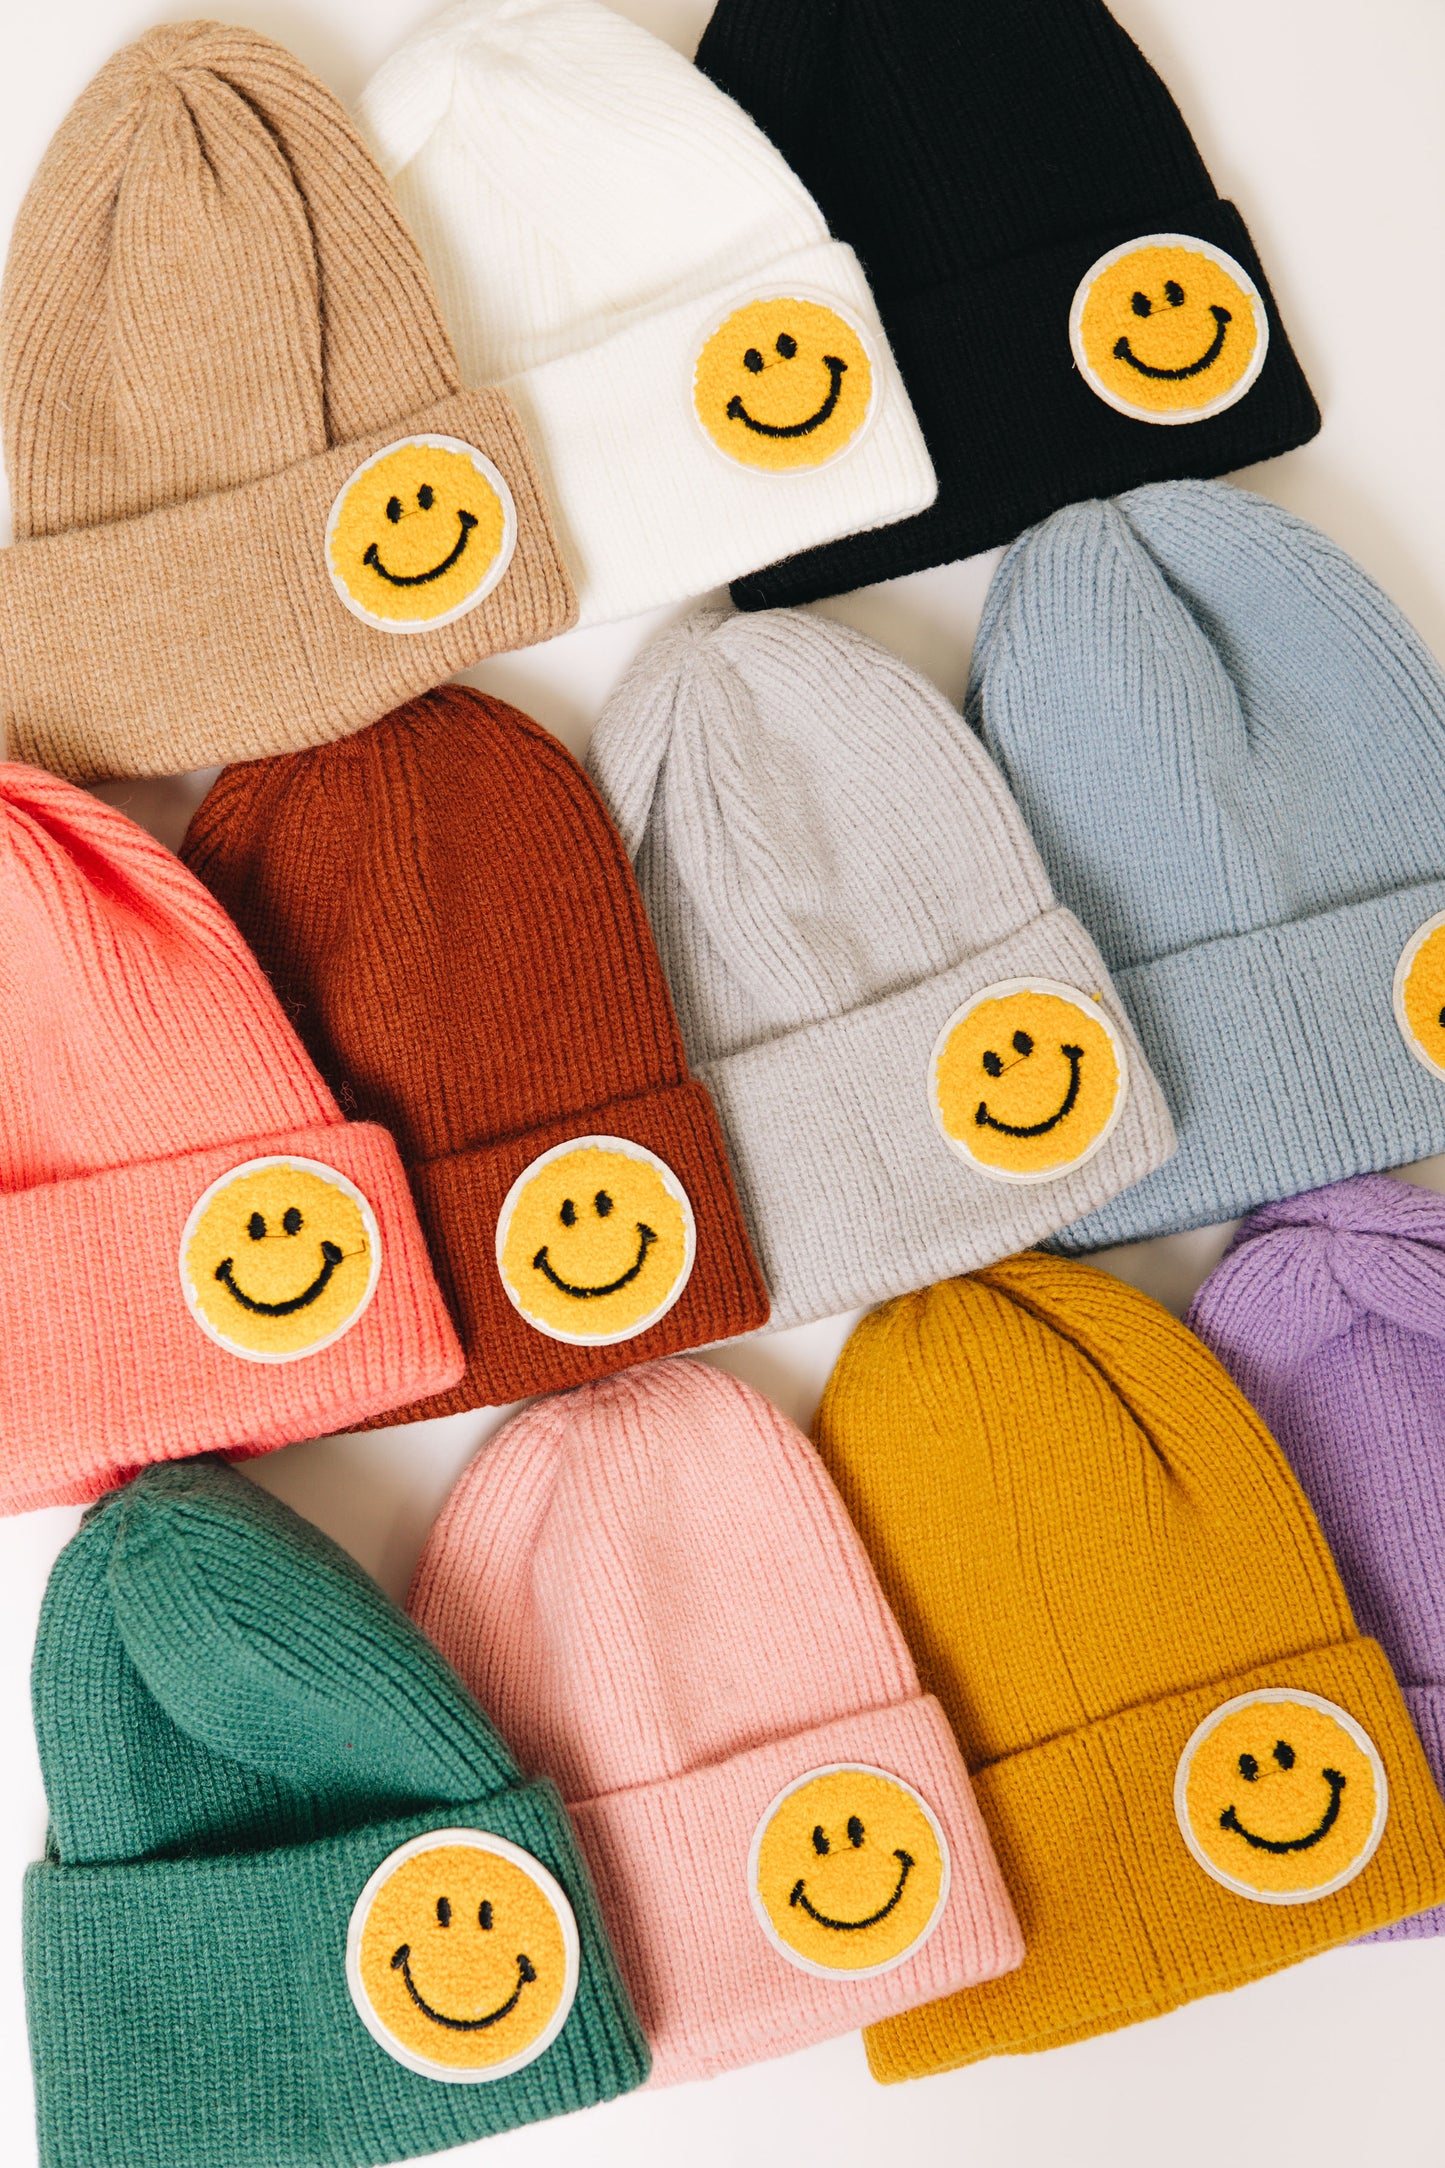 Have a Nice Day Smiley Women's Winter Beanie (OS)